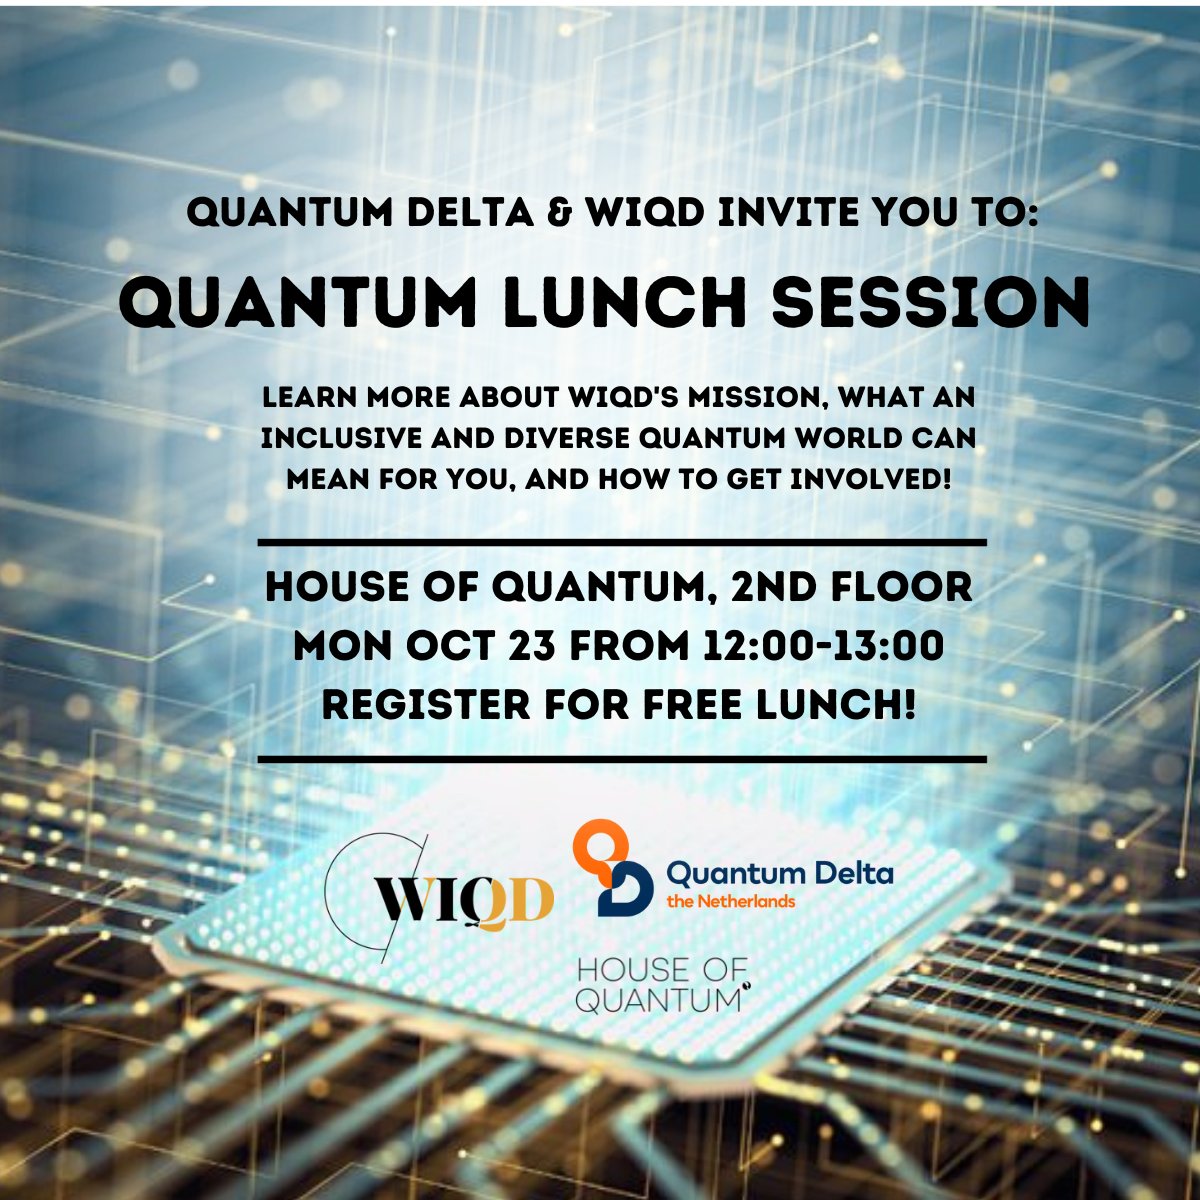 Join WIQD and @QuantumDeltaNL on Monday Oct 23 from 12:00-13:00 to talk about #DEI during our Quantum Lunch Session! Learn more about WIQD and Delft's #quantum ecosystem, connect with our amazing volunteers, and enjoy a free lunch buffet. Register: forms.gle/XTPpnWBMW1kVqP…